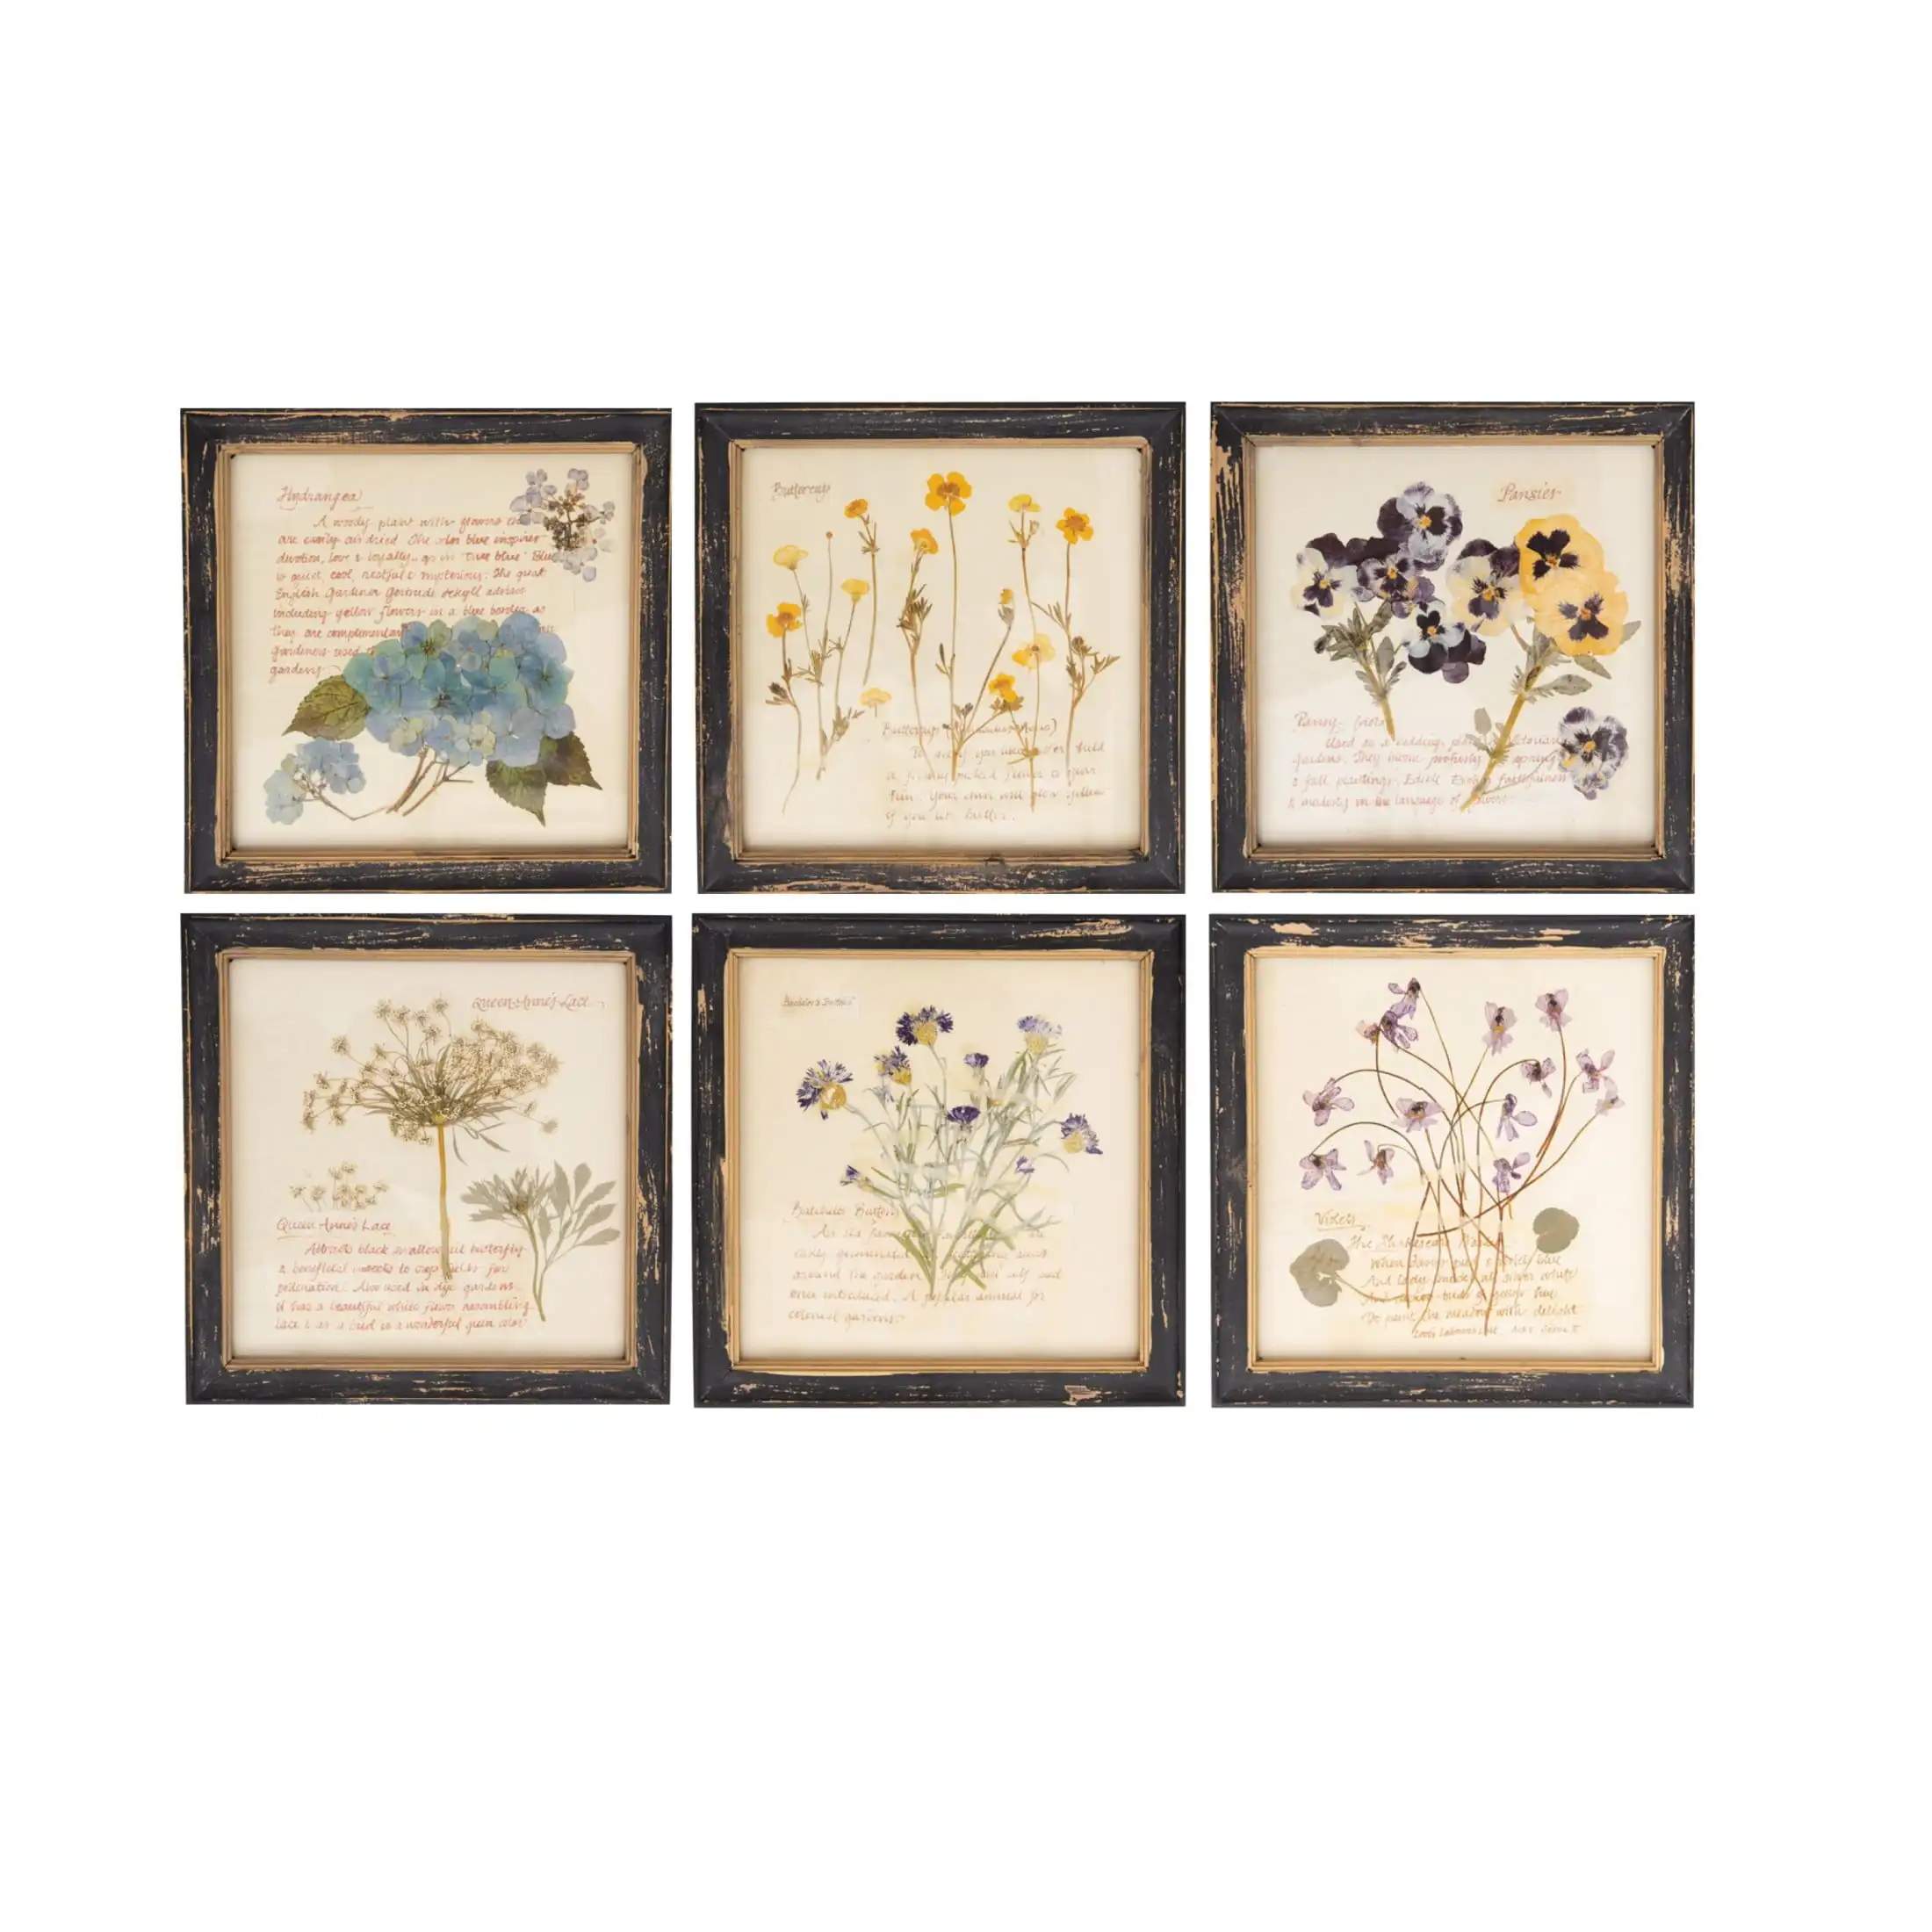 

Woven Paths Square Wood Framed Wall Decor with Floral Images (Set of 6 Designs) Durable Low-profil Luxurious Colorfast